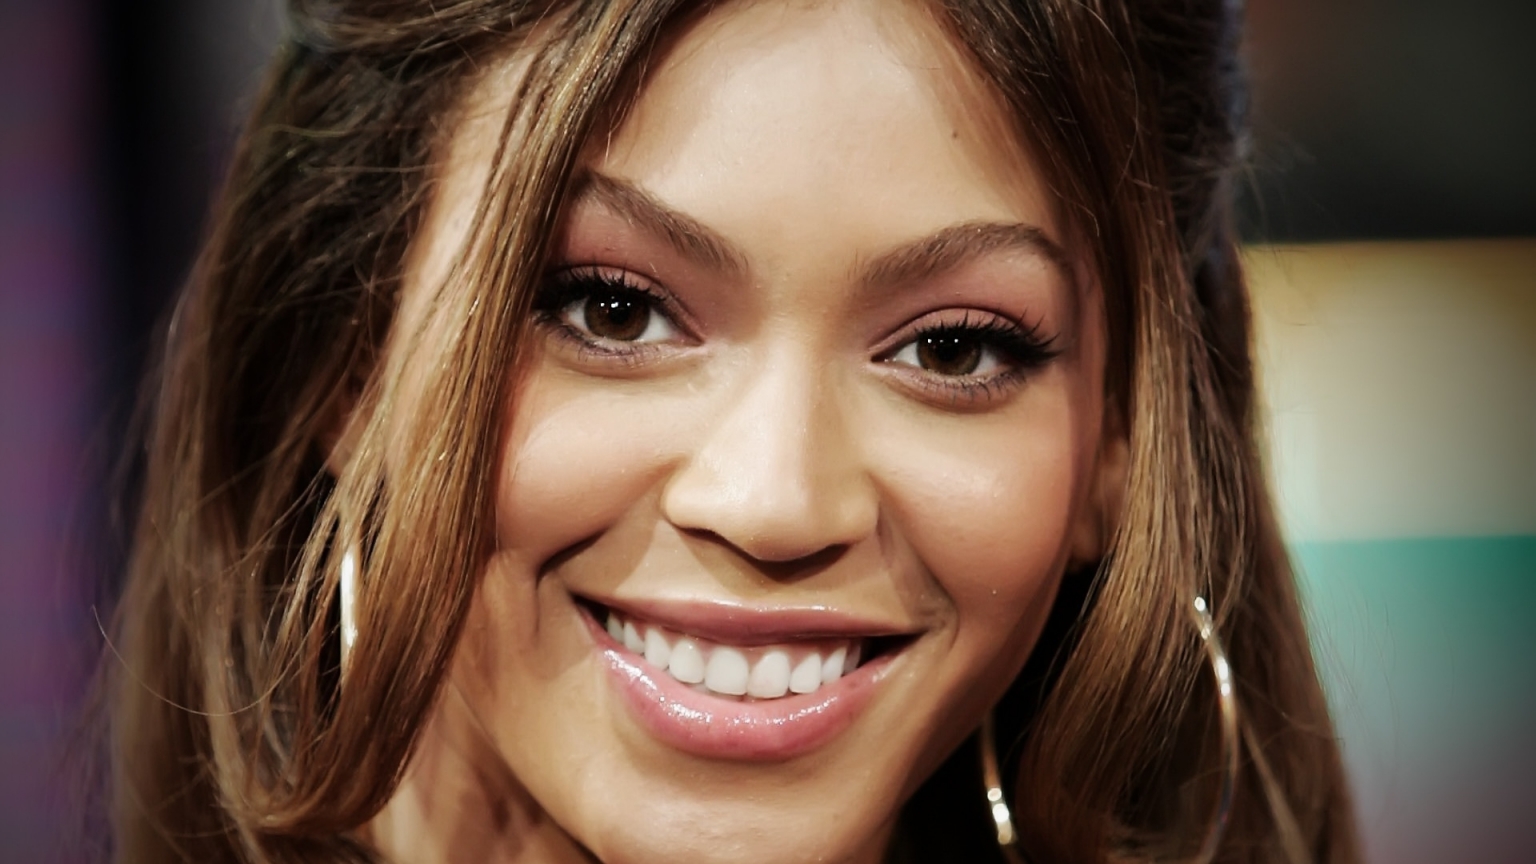 Beyonce Knowles happy for 1536 x 864 HDTV resolution